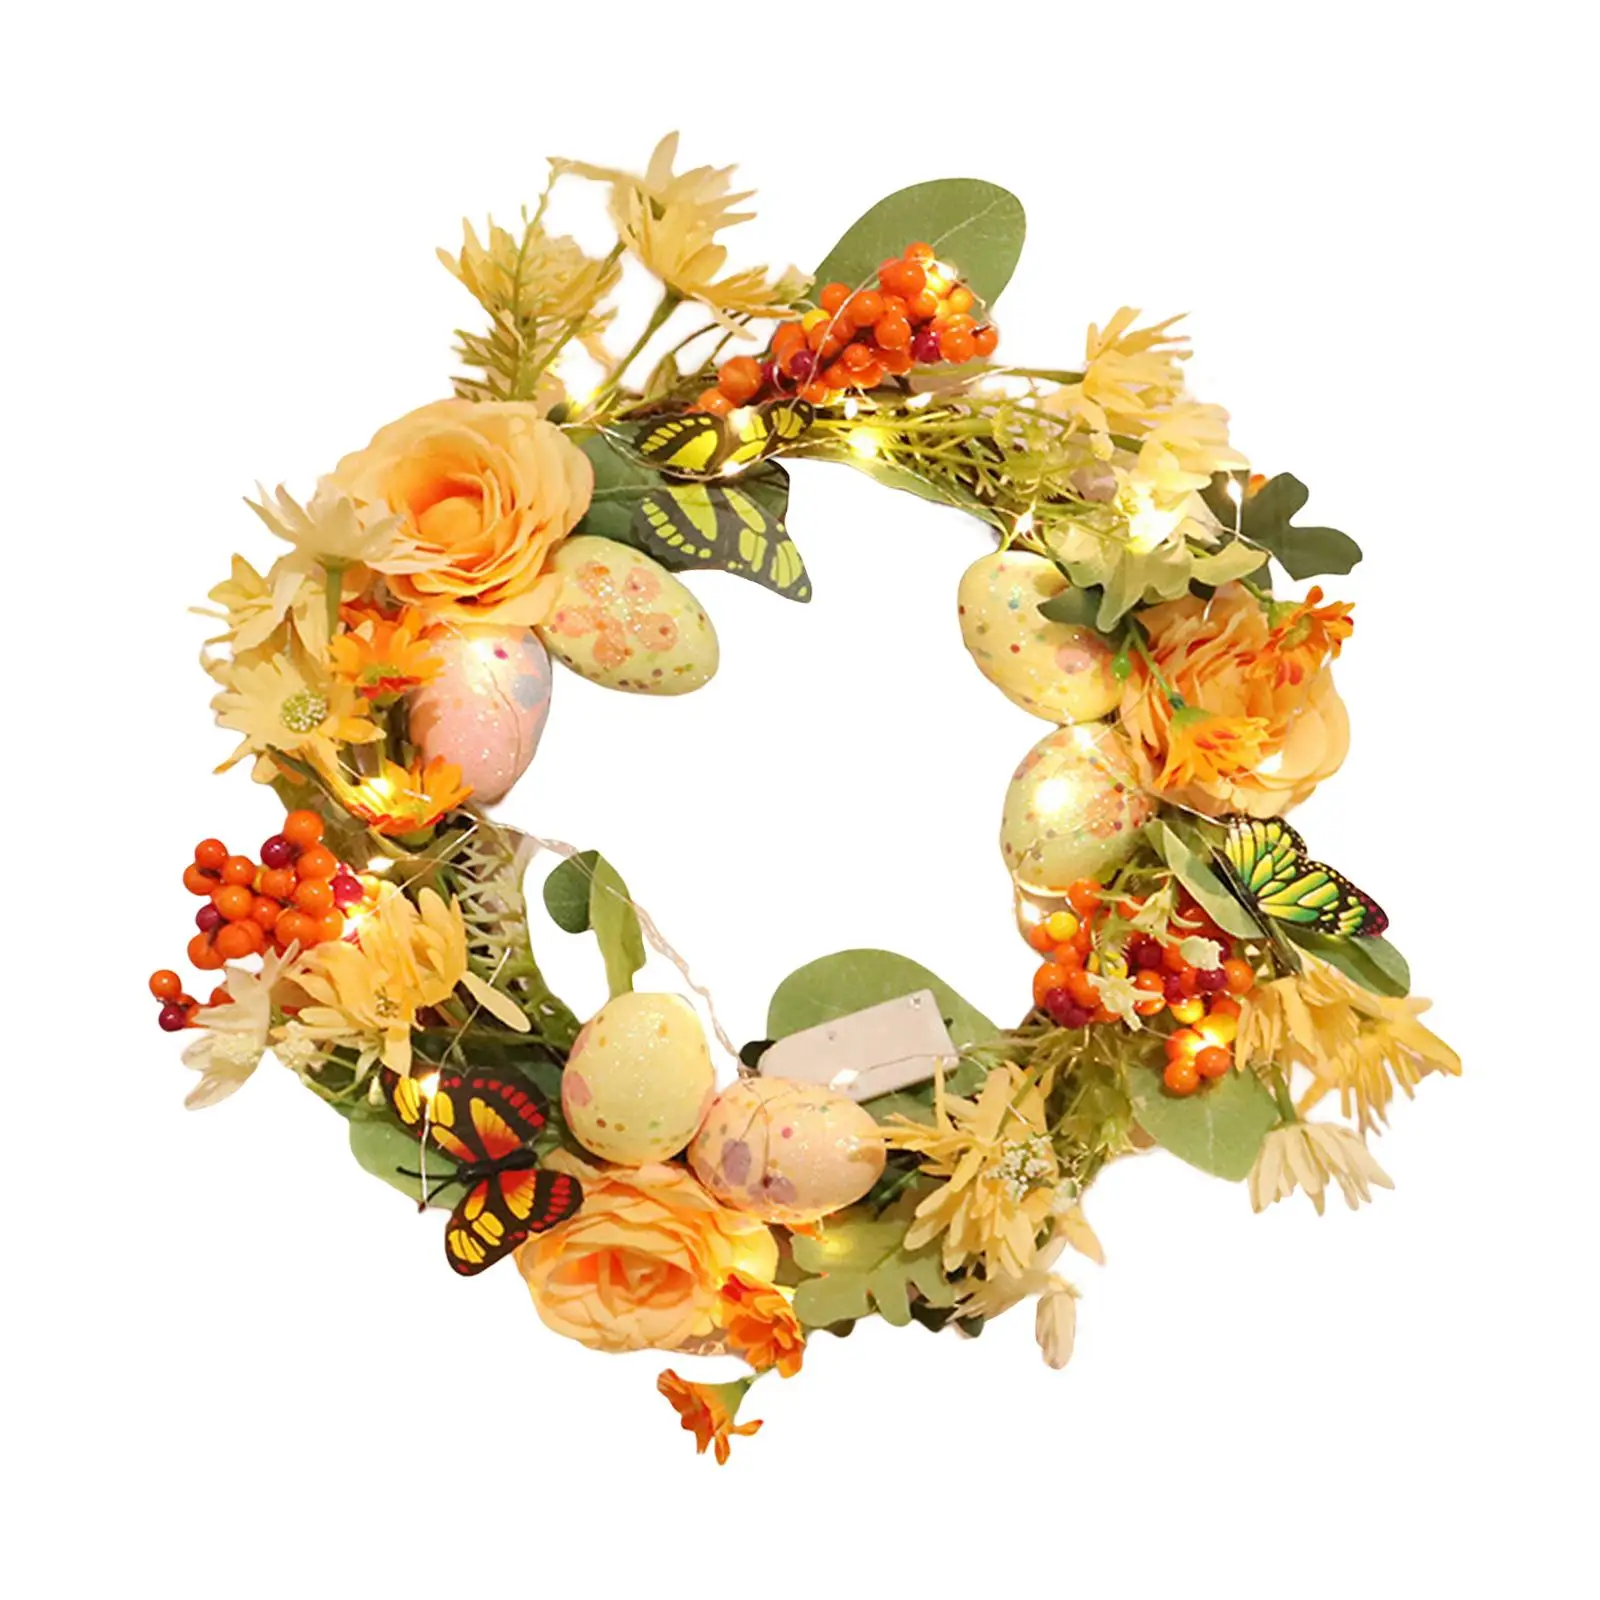 Lighted Easter Wreath Front Door Wreath Decor 12inch with LED Lights Greenery Leaves Flowers Wreaths for Backdrop Outside Spring